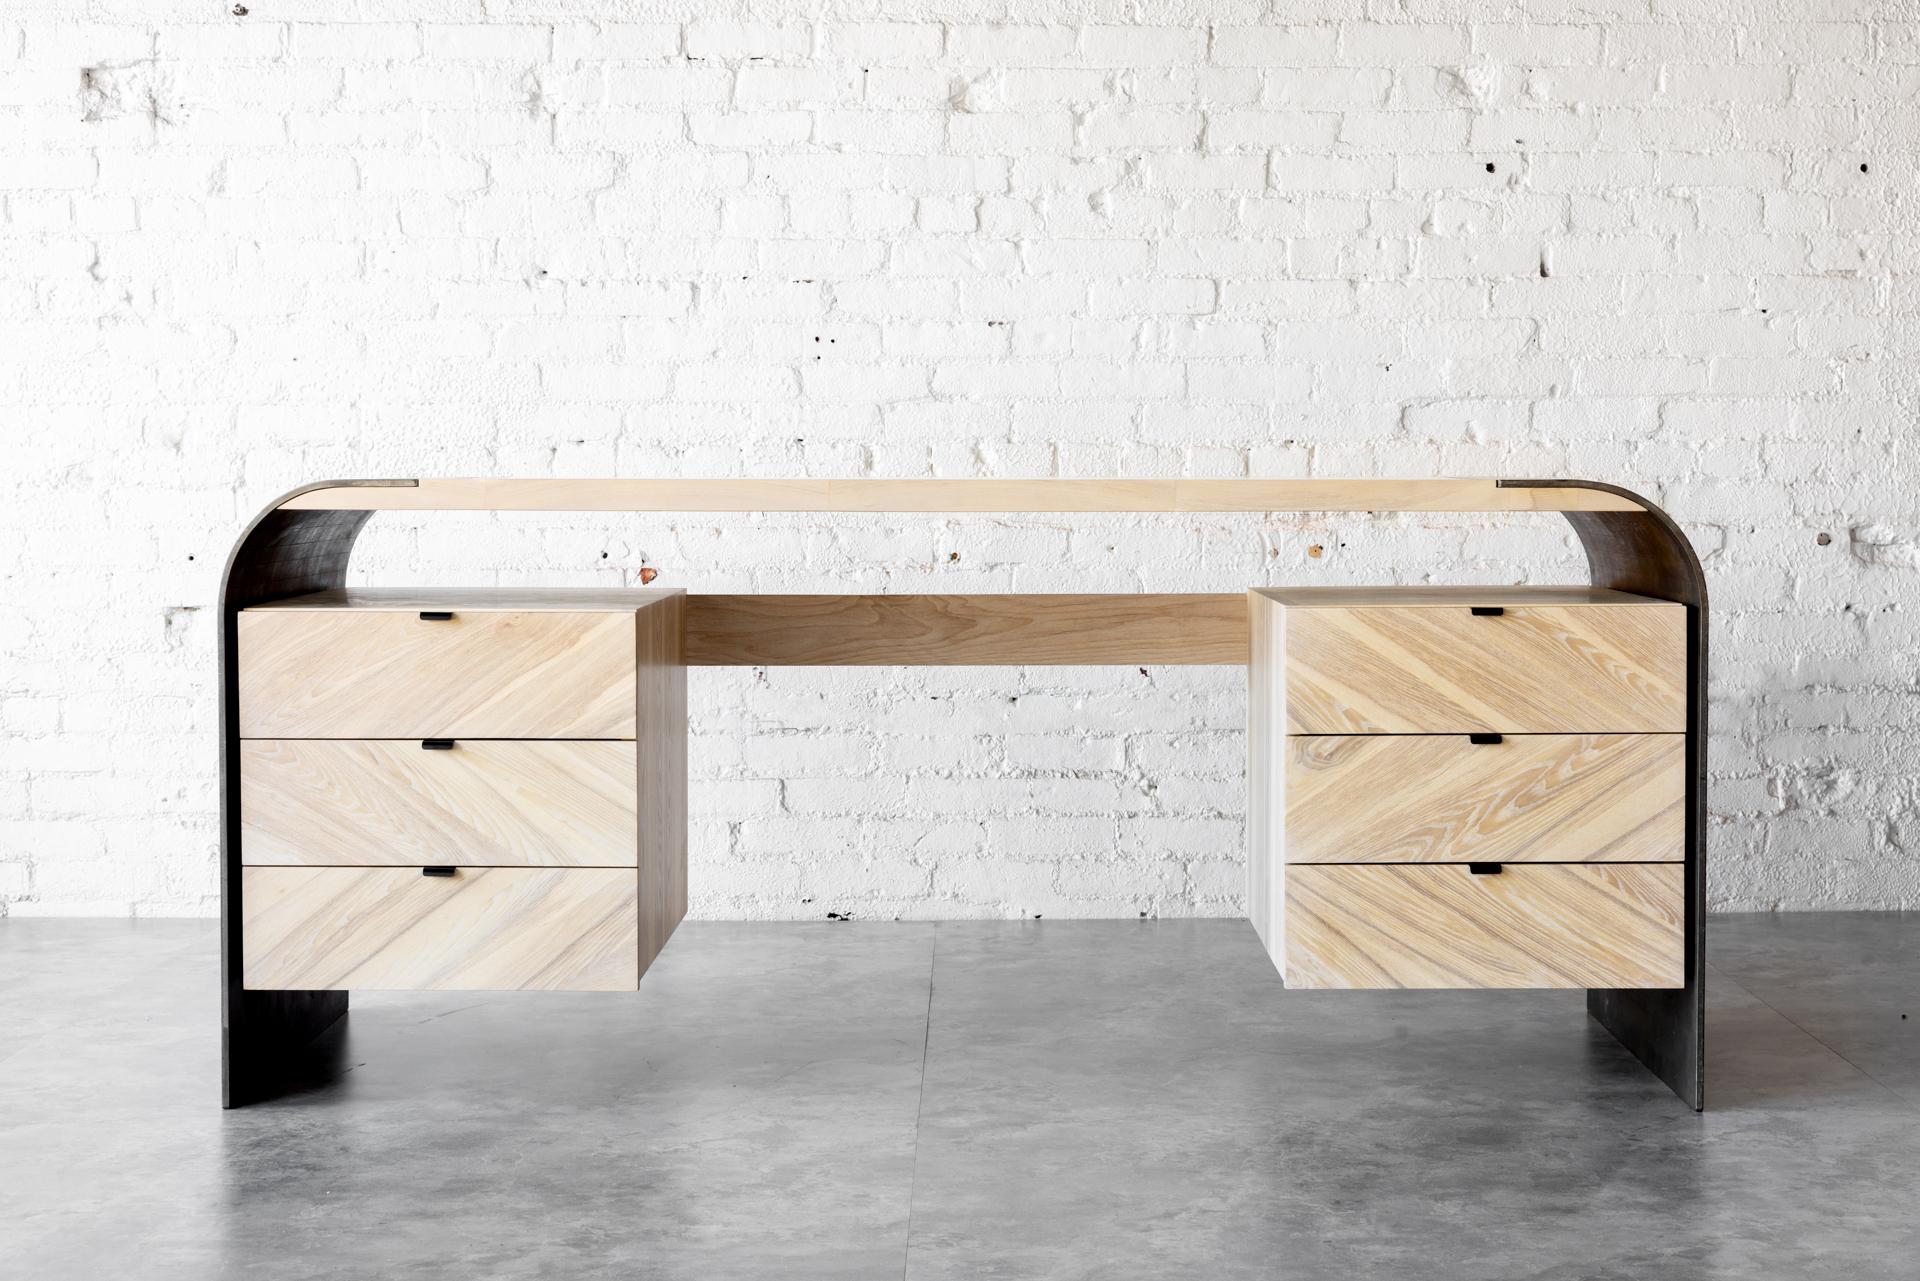 Elevate your workspace with the stunning Aurora Desk from Autonomous Furniture. Crafted from the finest Whitened Ash wood and raw steel, this modern industrial desk is a true statement piece for any home or office. The unique herringbone pattern on